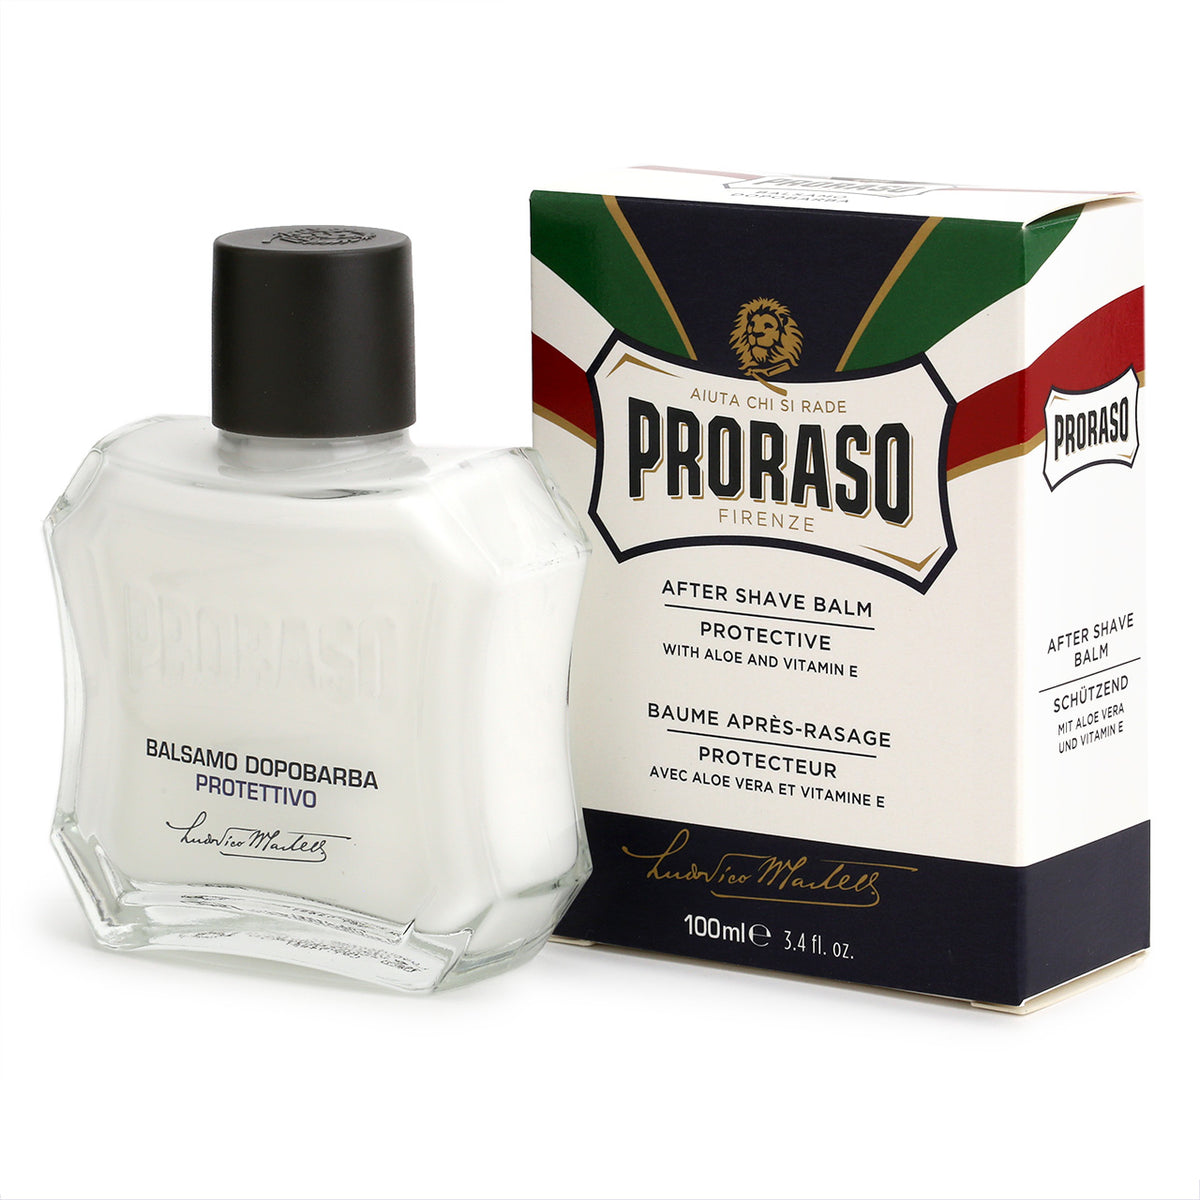 Proraso After Shave Balm with Aloe Vera &amp; Vitamin E - Protective - with retro-shaped bottle and box